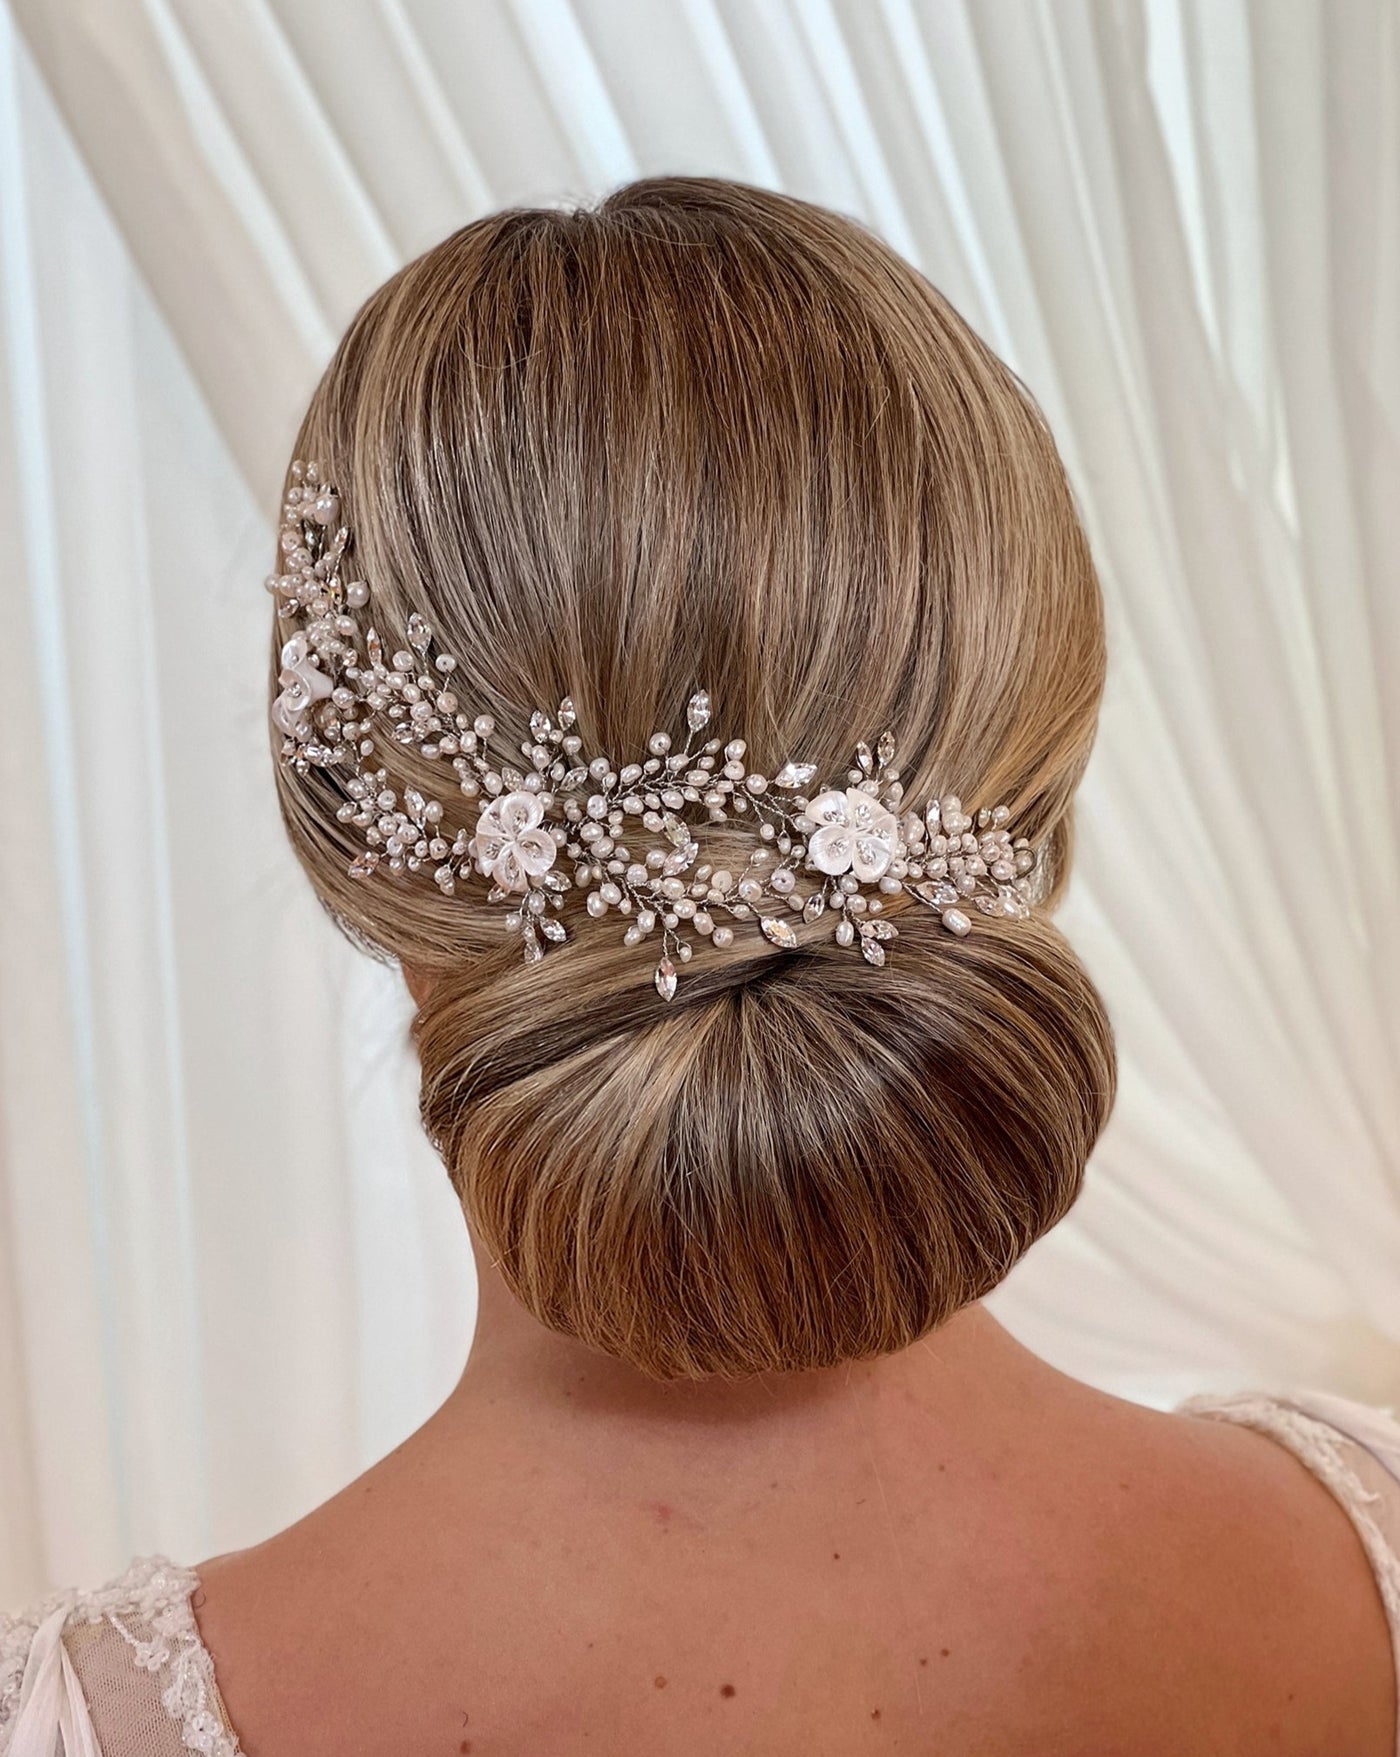 female model wearing looping bridal hair vine with pearls, springs of crystals, and porcelain flower details above an updo, back view